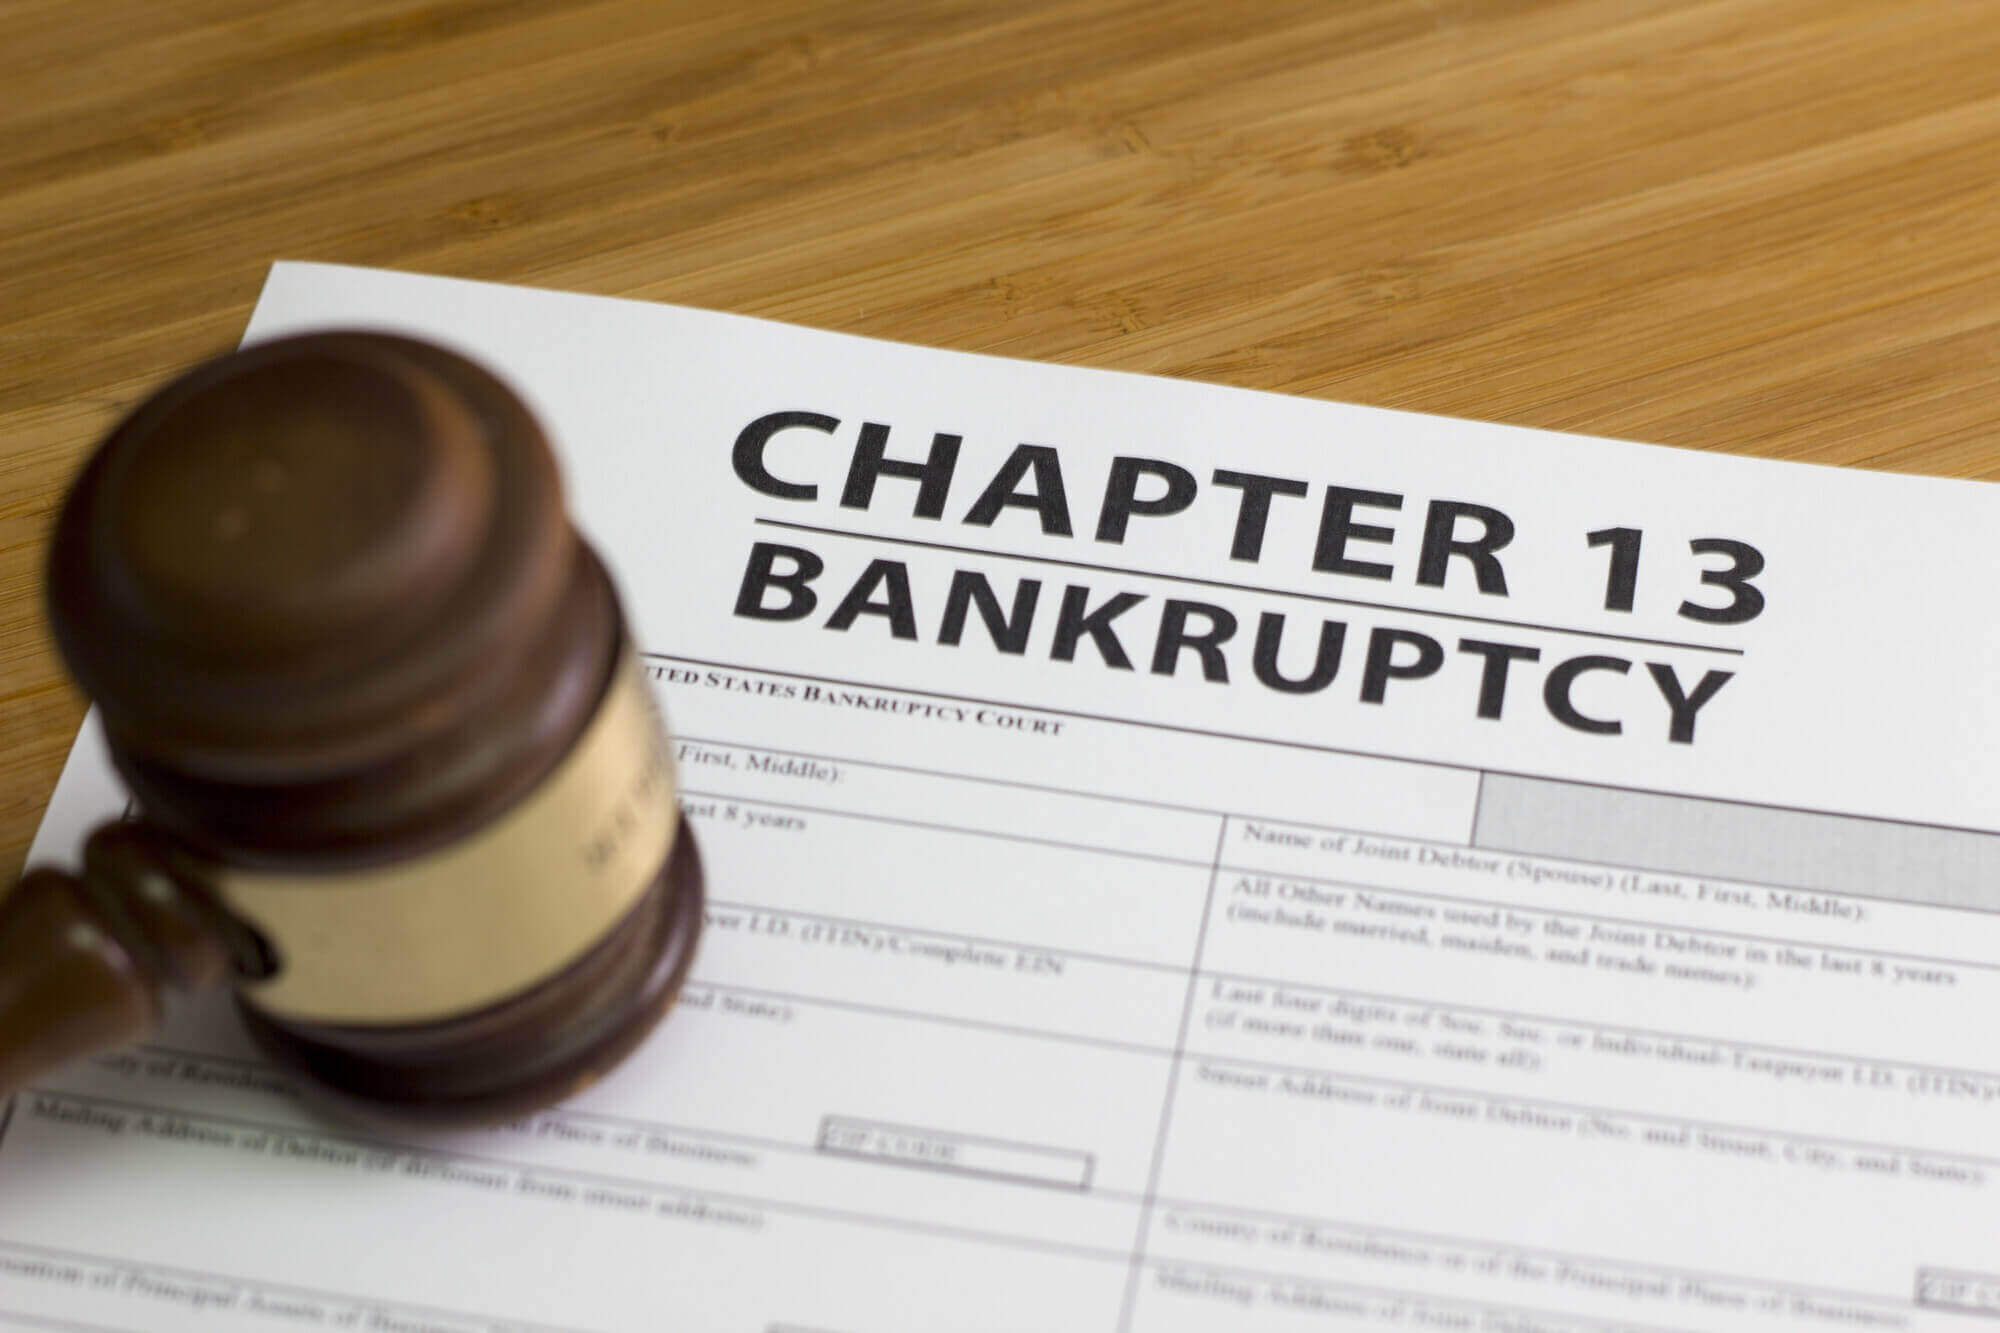 Bankruptcy document on table